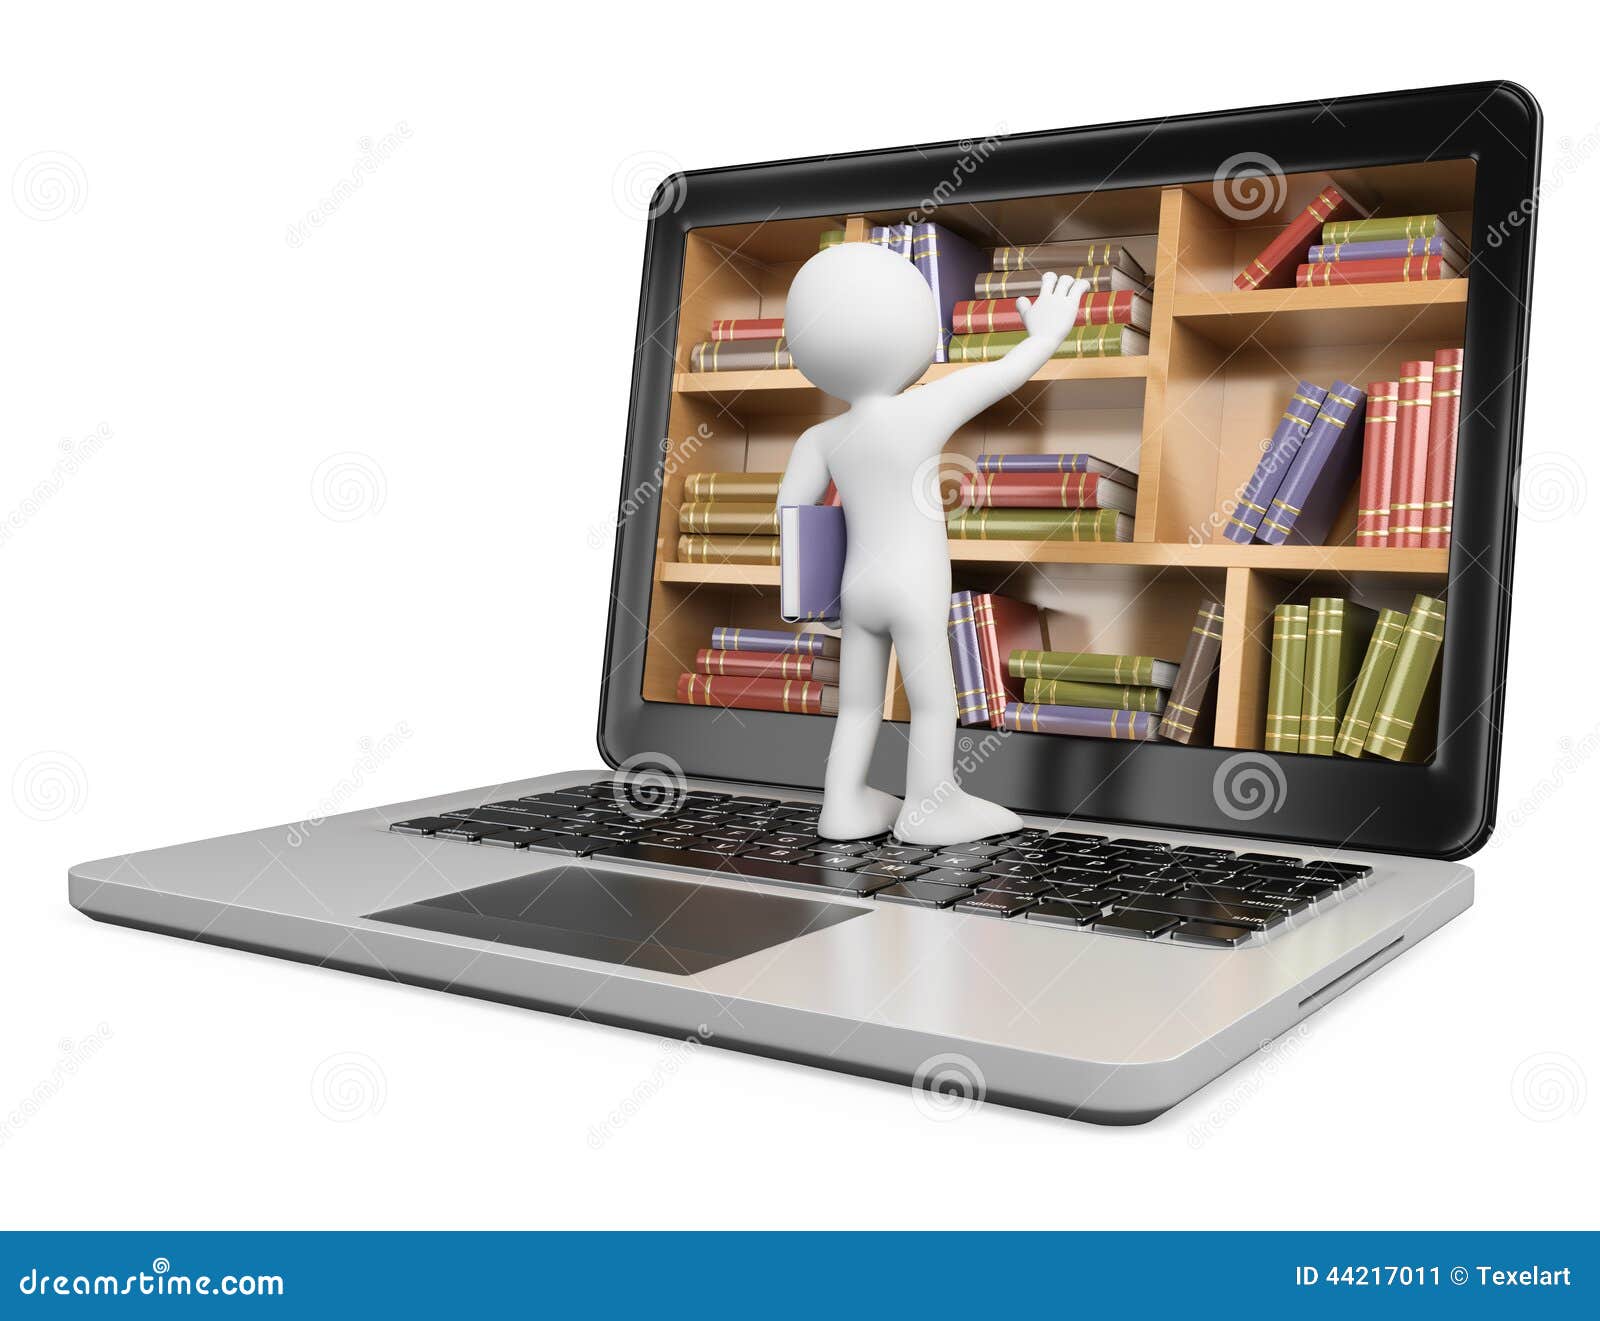 Digital Library, Management Of Files And Documents, Tiny Woman Working ...